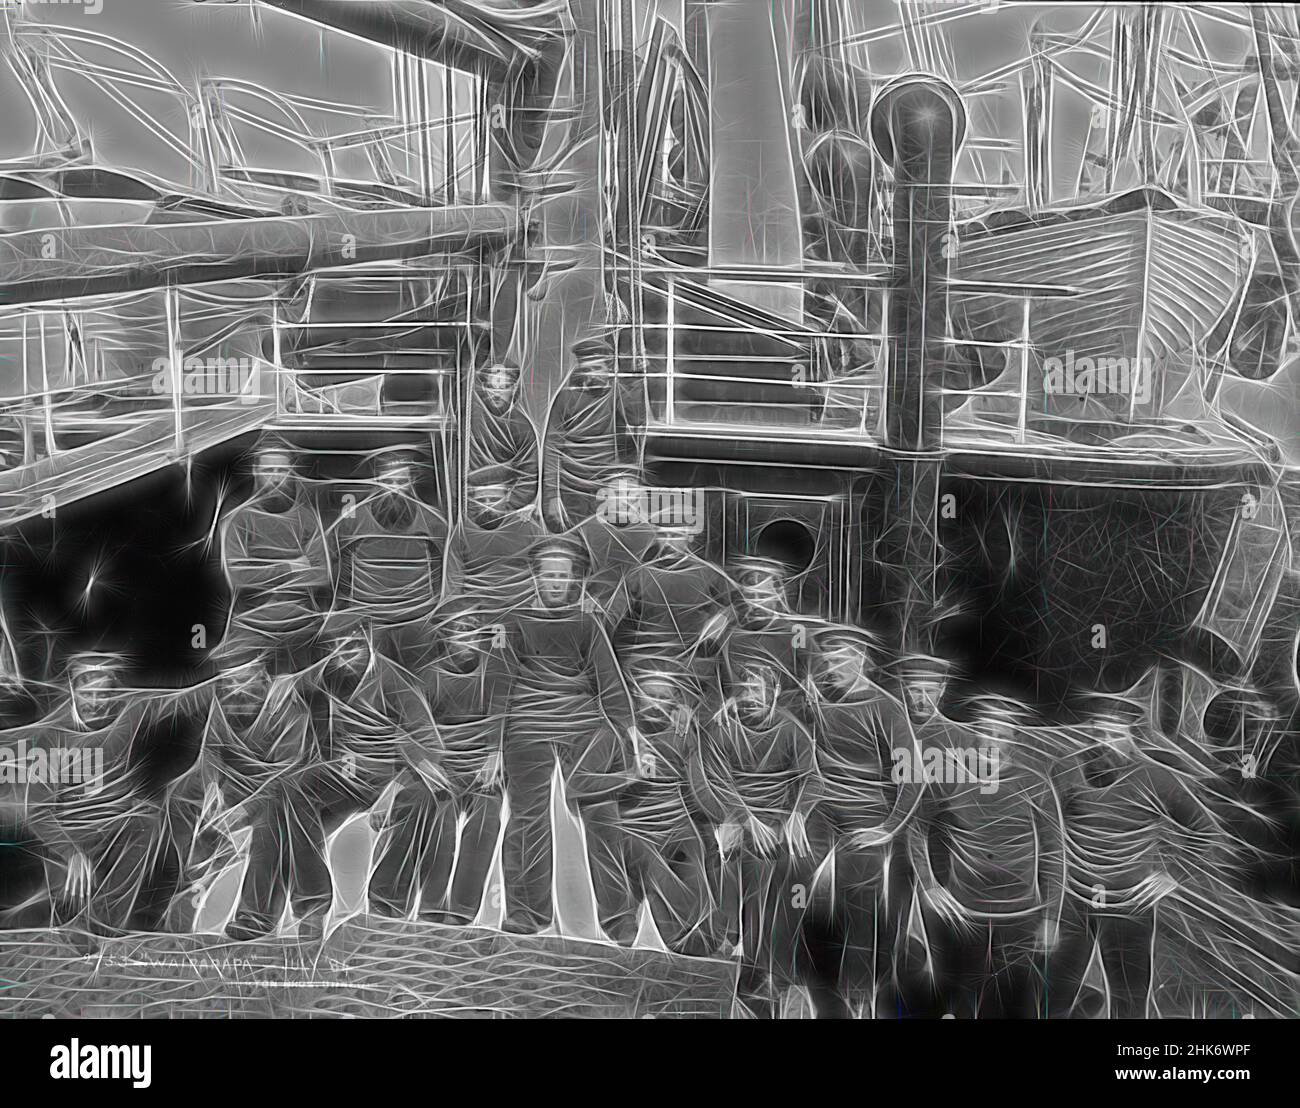 Inspired by Wairarapa - July '84, Burton Brothers studio, photography studio, 1884, New Zealand, black-and-white photography, Crew of large ship on bottom deck. Nineteen men in Union Steamship Company uniform. Funnel and hight deck behind, with longboats on either side, Reimagined by Artotop. Classic art reinvented with a modern twist. Design of warm cheerful glowing of brightness and light ray radiance. Photography inspired by surrealism and futurism, embracing dynamic energy of modern technology, movement, speed and revolutionize culture Stock Photo